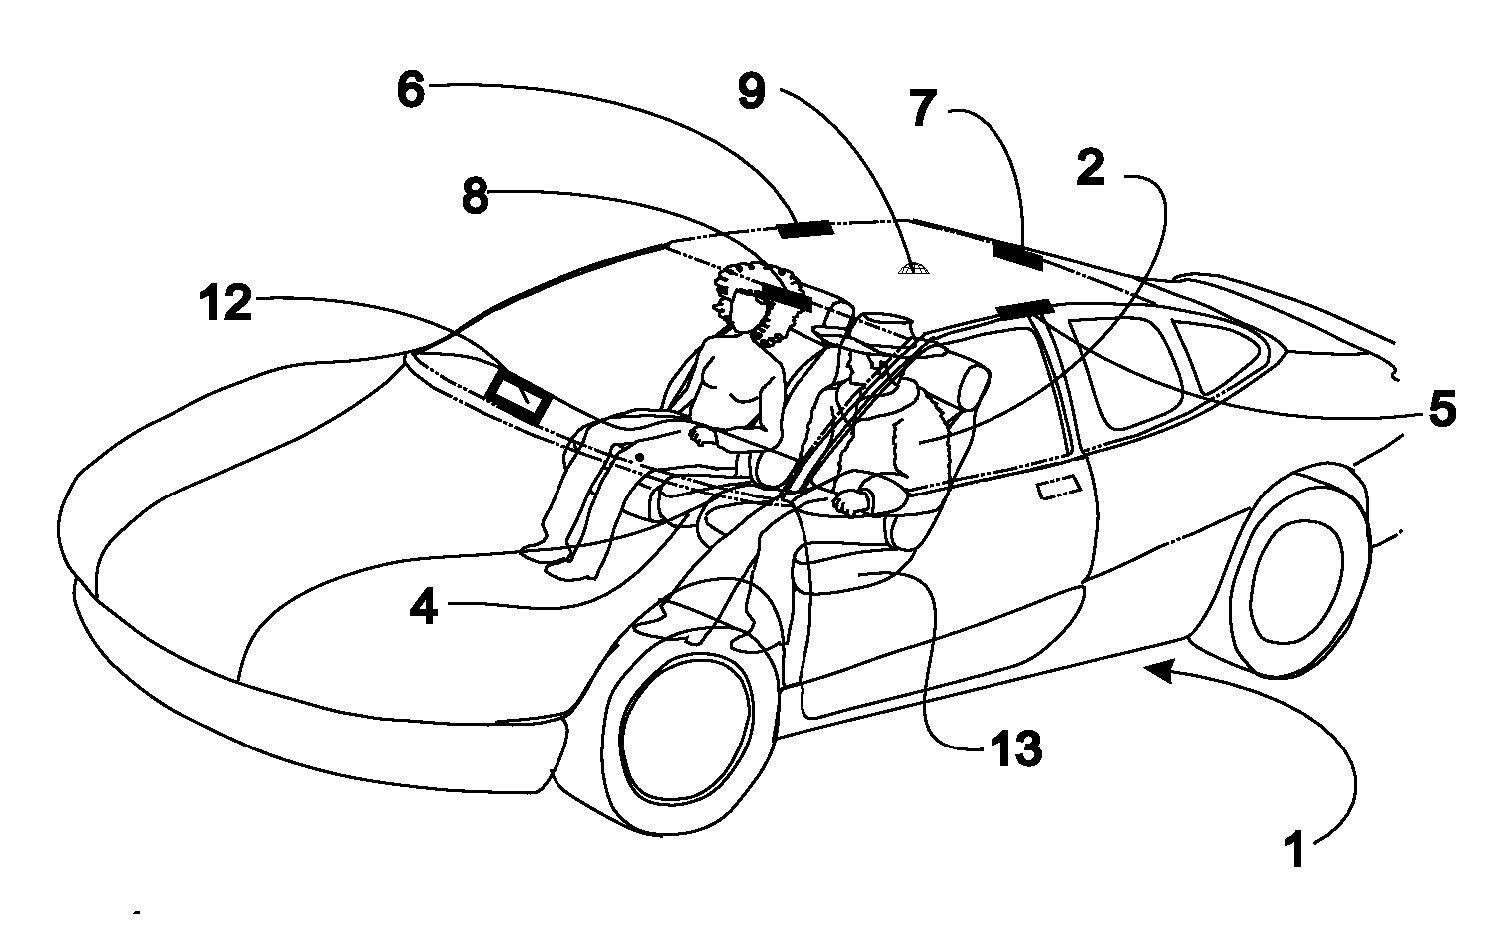 System and Method for Preventing Vehicular Accidents